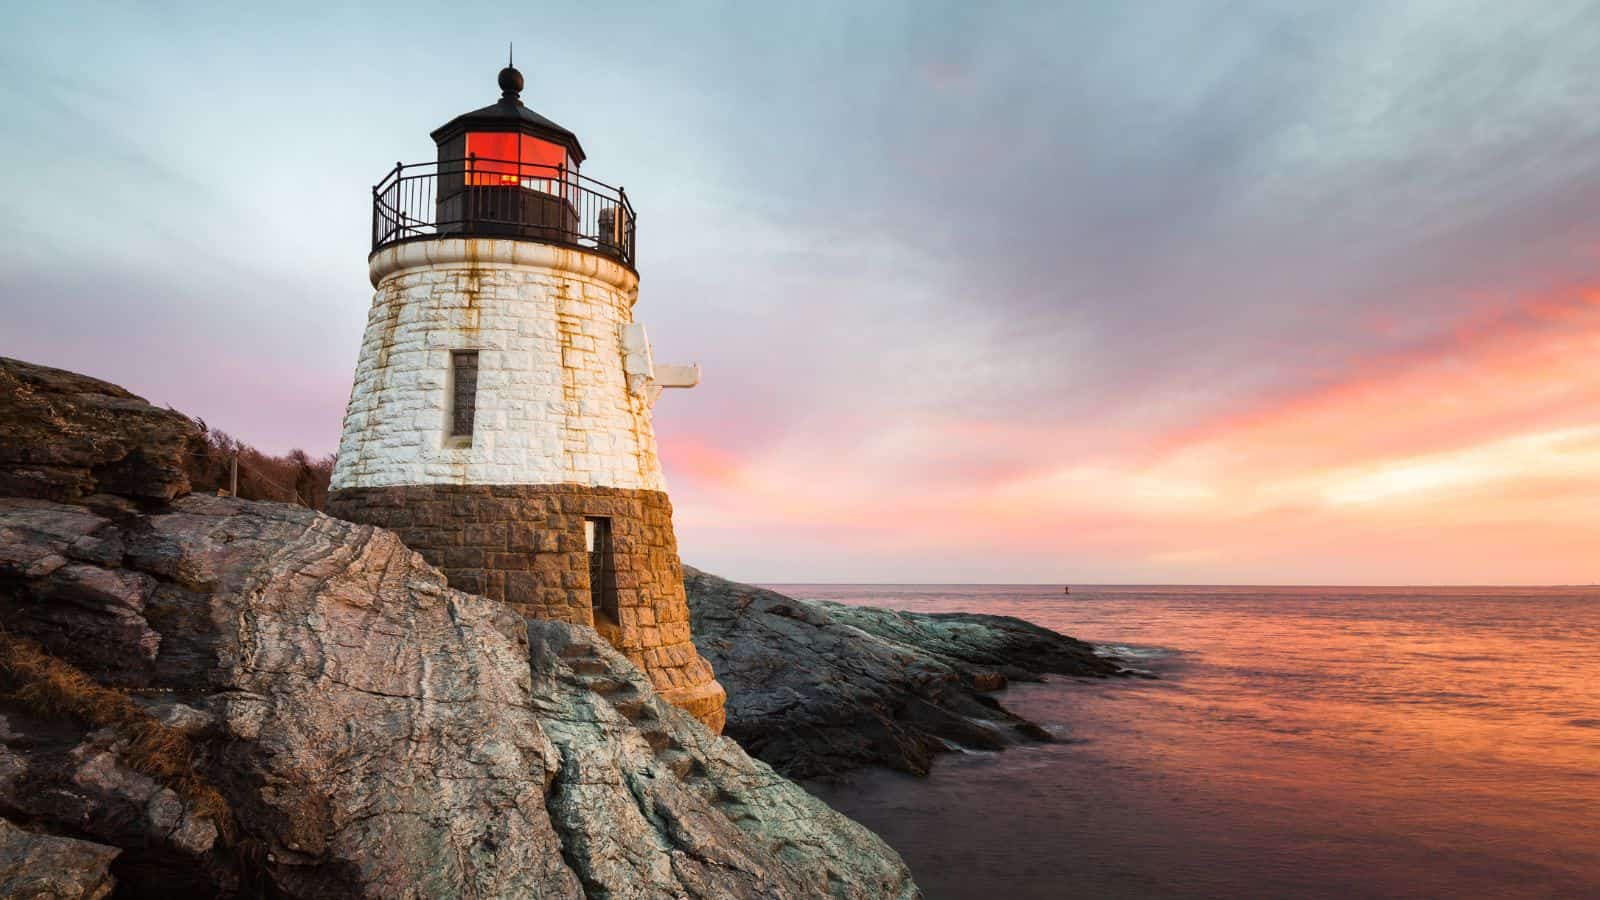 <p>Locals in the Northeast know that Rhode Island is one of the country’s most overlooked states—and Newport proves it. The harborside town is best known for hosting the America’s Cup, a sailing regatta, and the Gilded Age mansions that line Bellevue Avenue.</p><p>Go shopping on Thames Street or hit Belle’s Cafe for a view of the harbor. Then again, the best views of Newport might be those seen on a charter boat tour, which aren’t as expensive as they sound.</p>